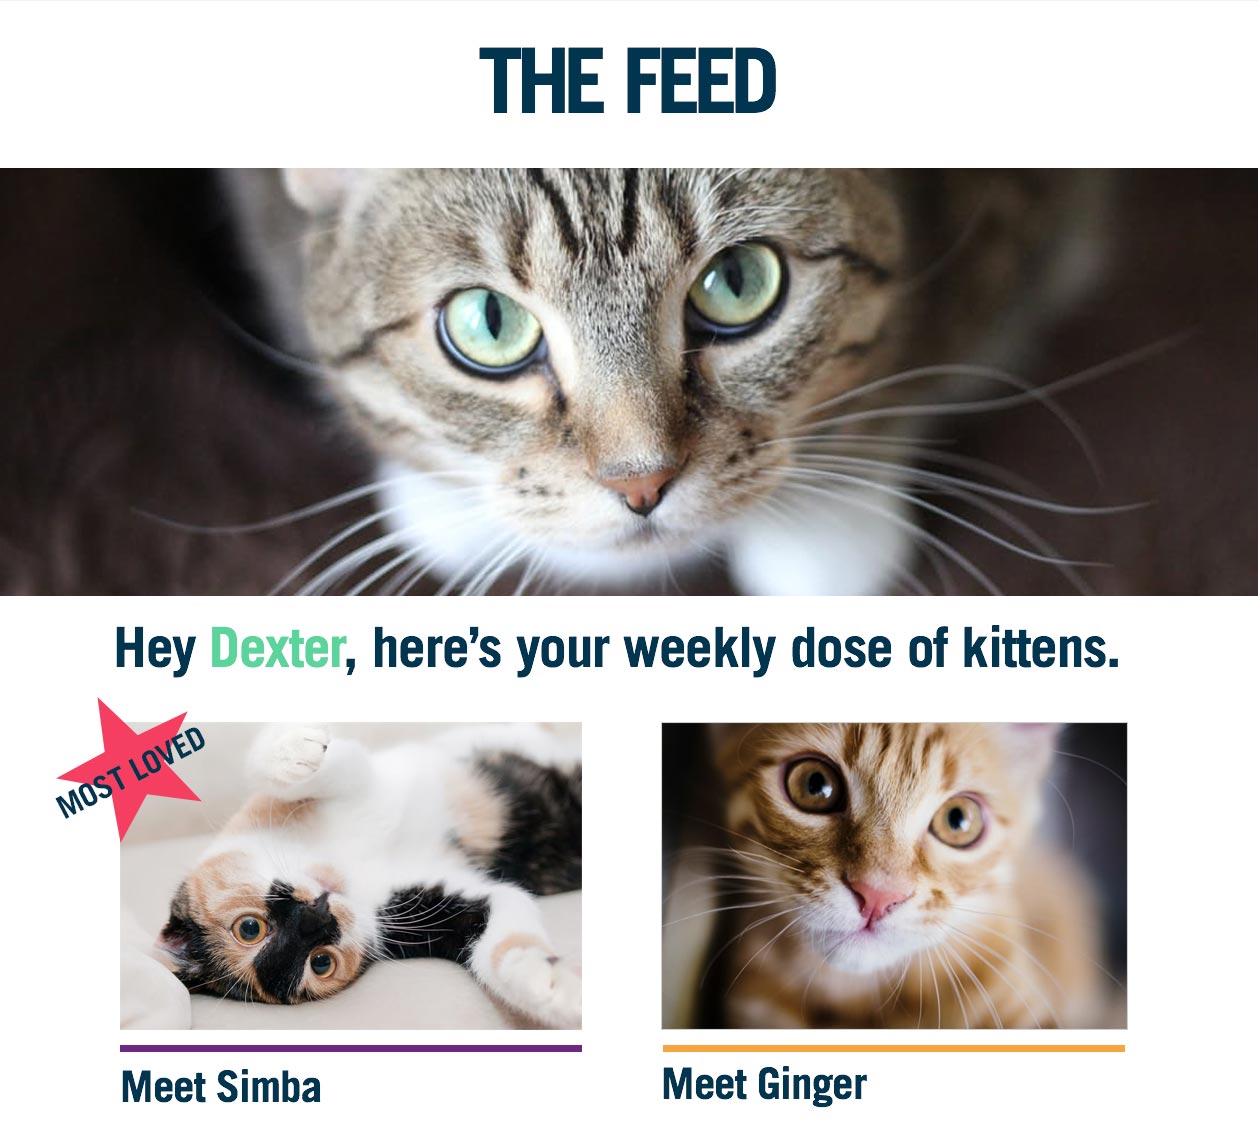  Personalized Email by Dynamic Content - Kittens